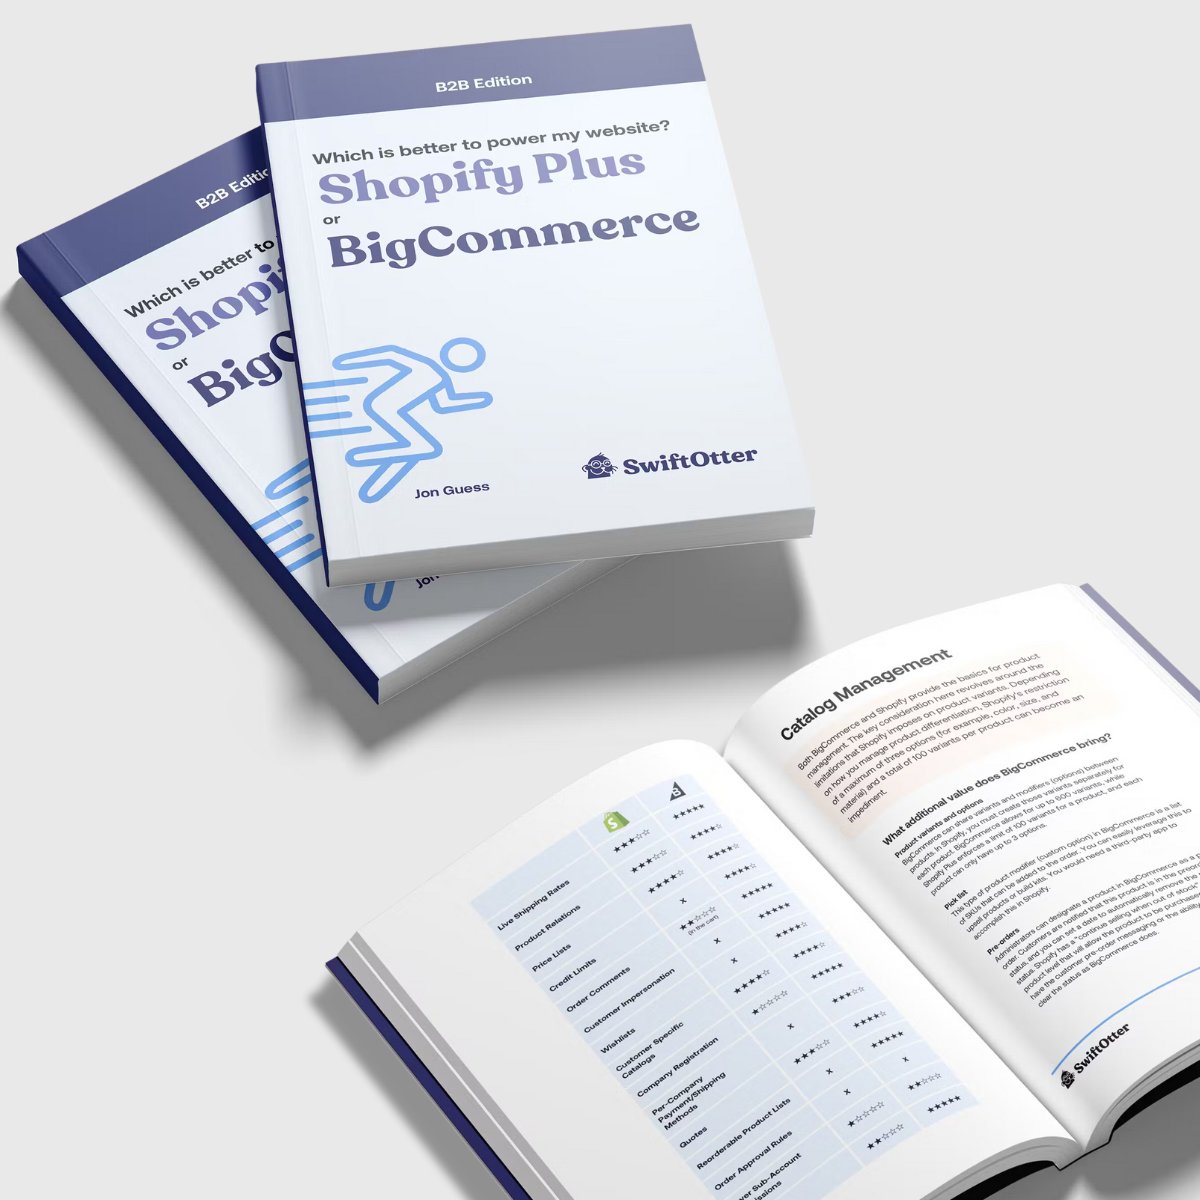 Shopify Plus or BigCommerce for B2B? It's not about what's popular, but what fits YOU. Let's redefine the question: 'Which is better for me?' Unlock the answers with our FREE ebook (link in thread)
#swiftotter #bigcommerce #bigcommercedeveloper #bigcommercepartner